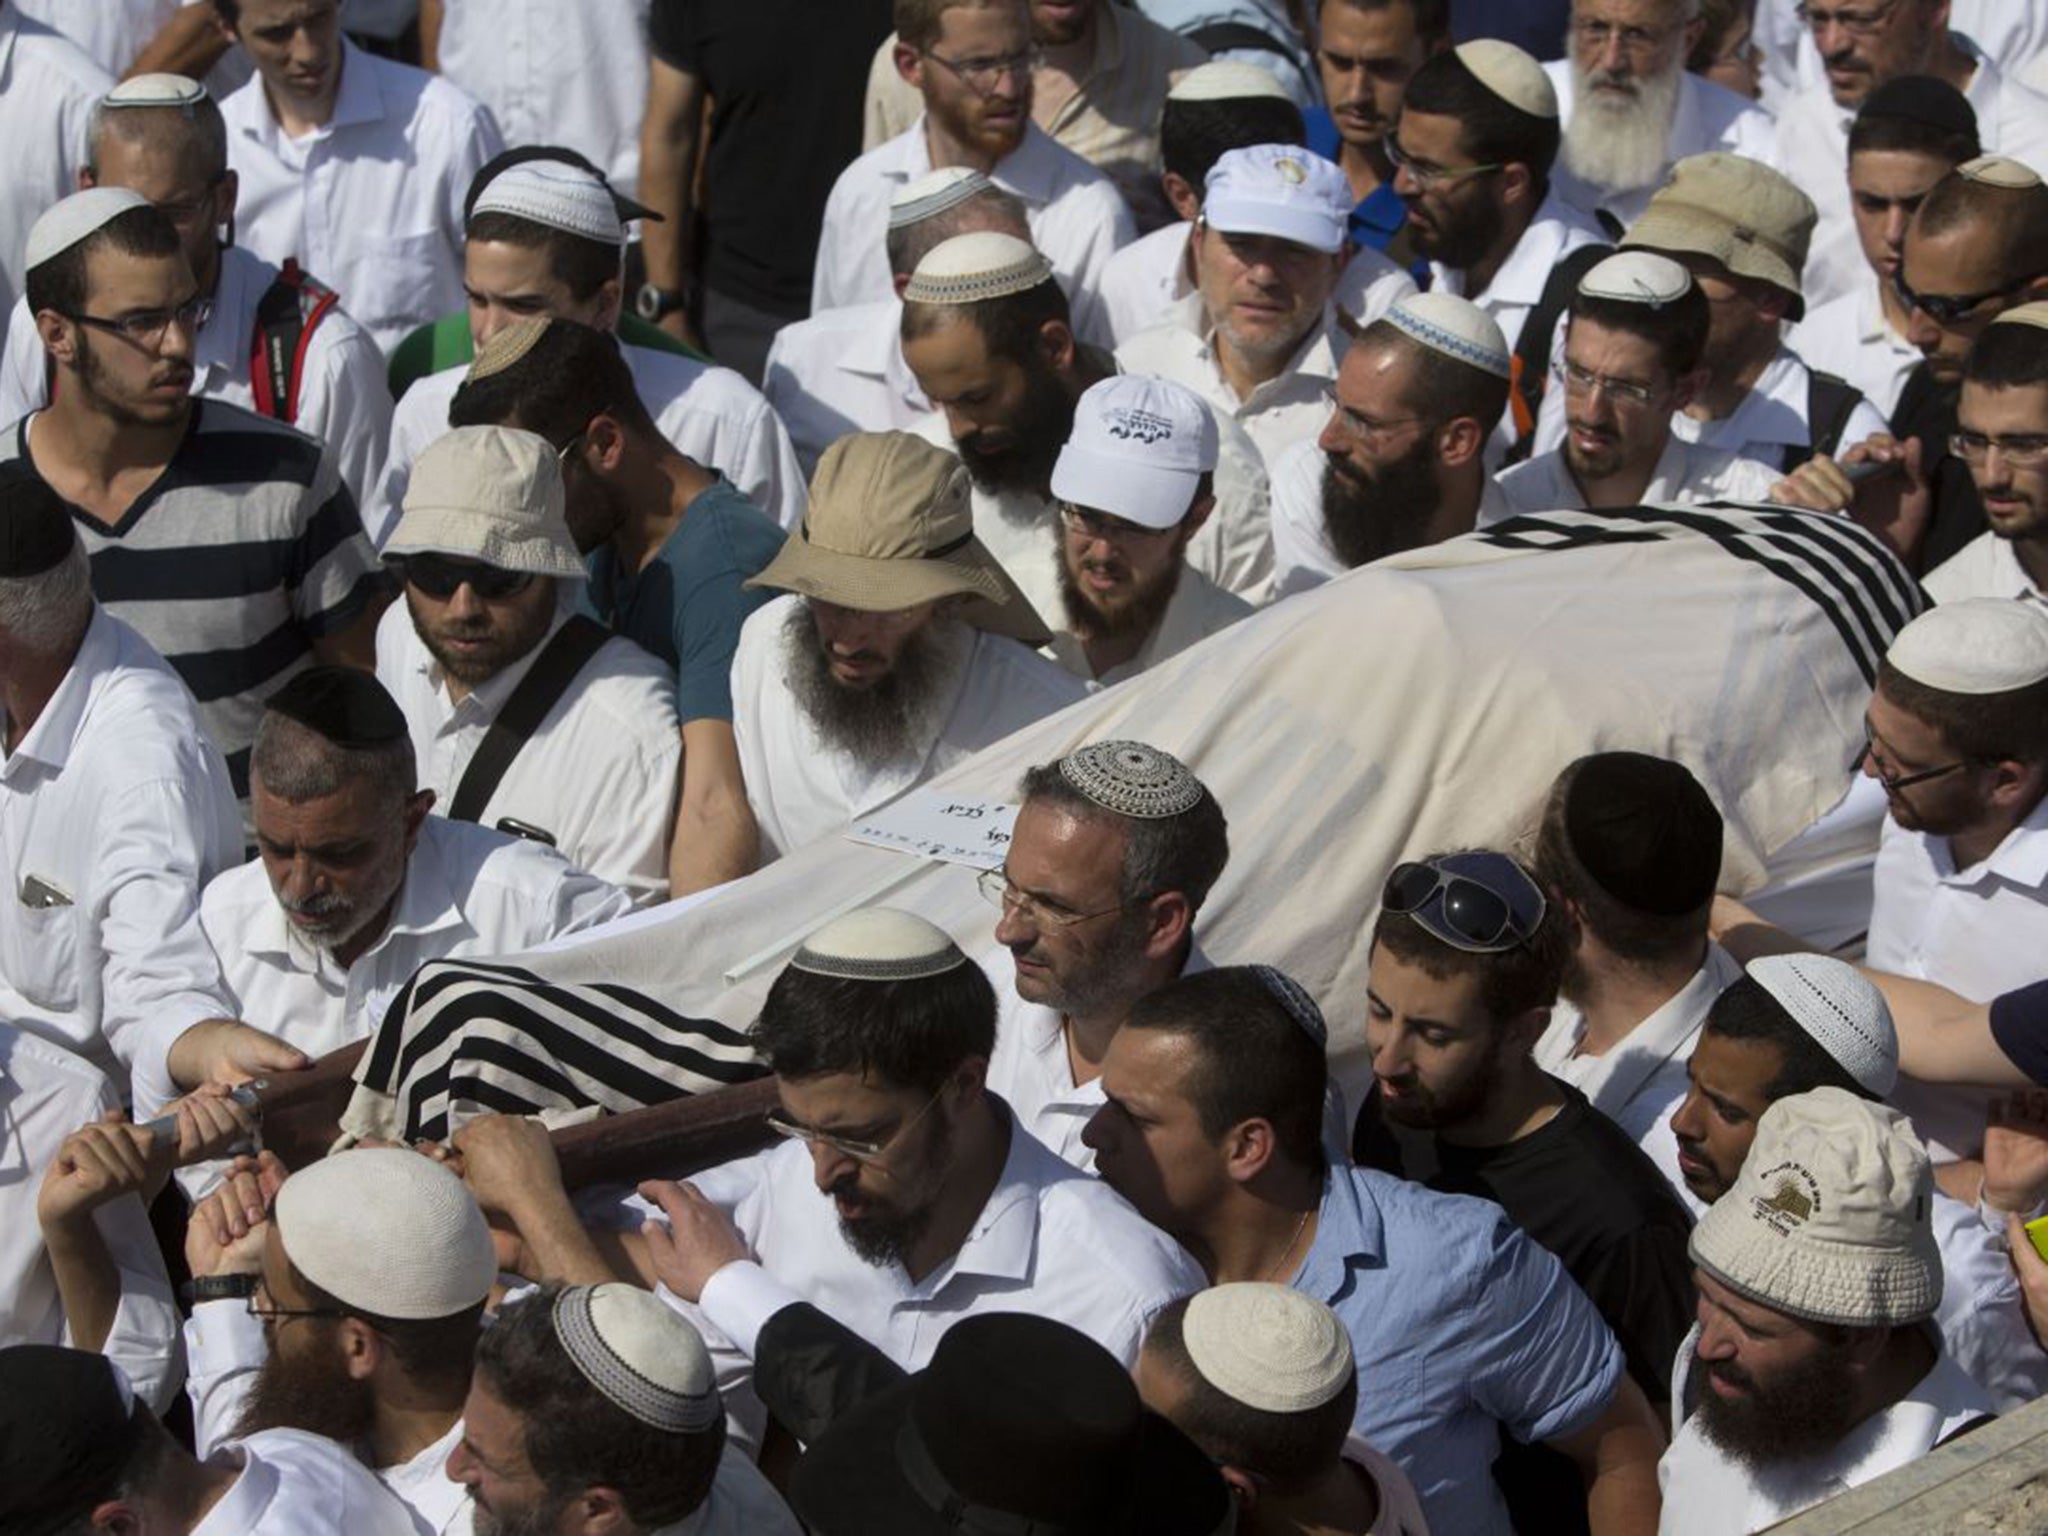 Israeli relatives and friends carry the body of Rabbi Nehemia Lavi, during his funeral at a cemetery in Jerusalem